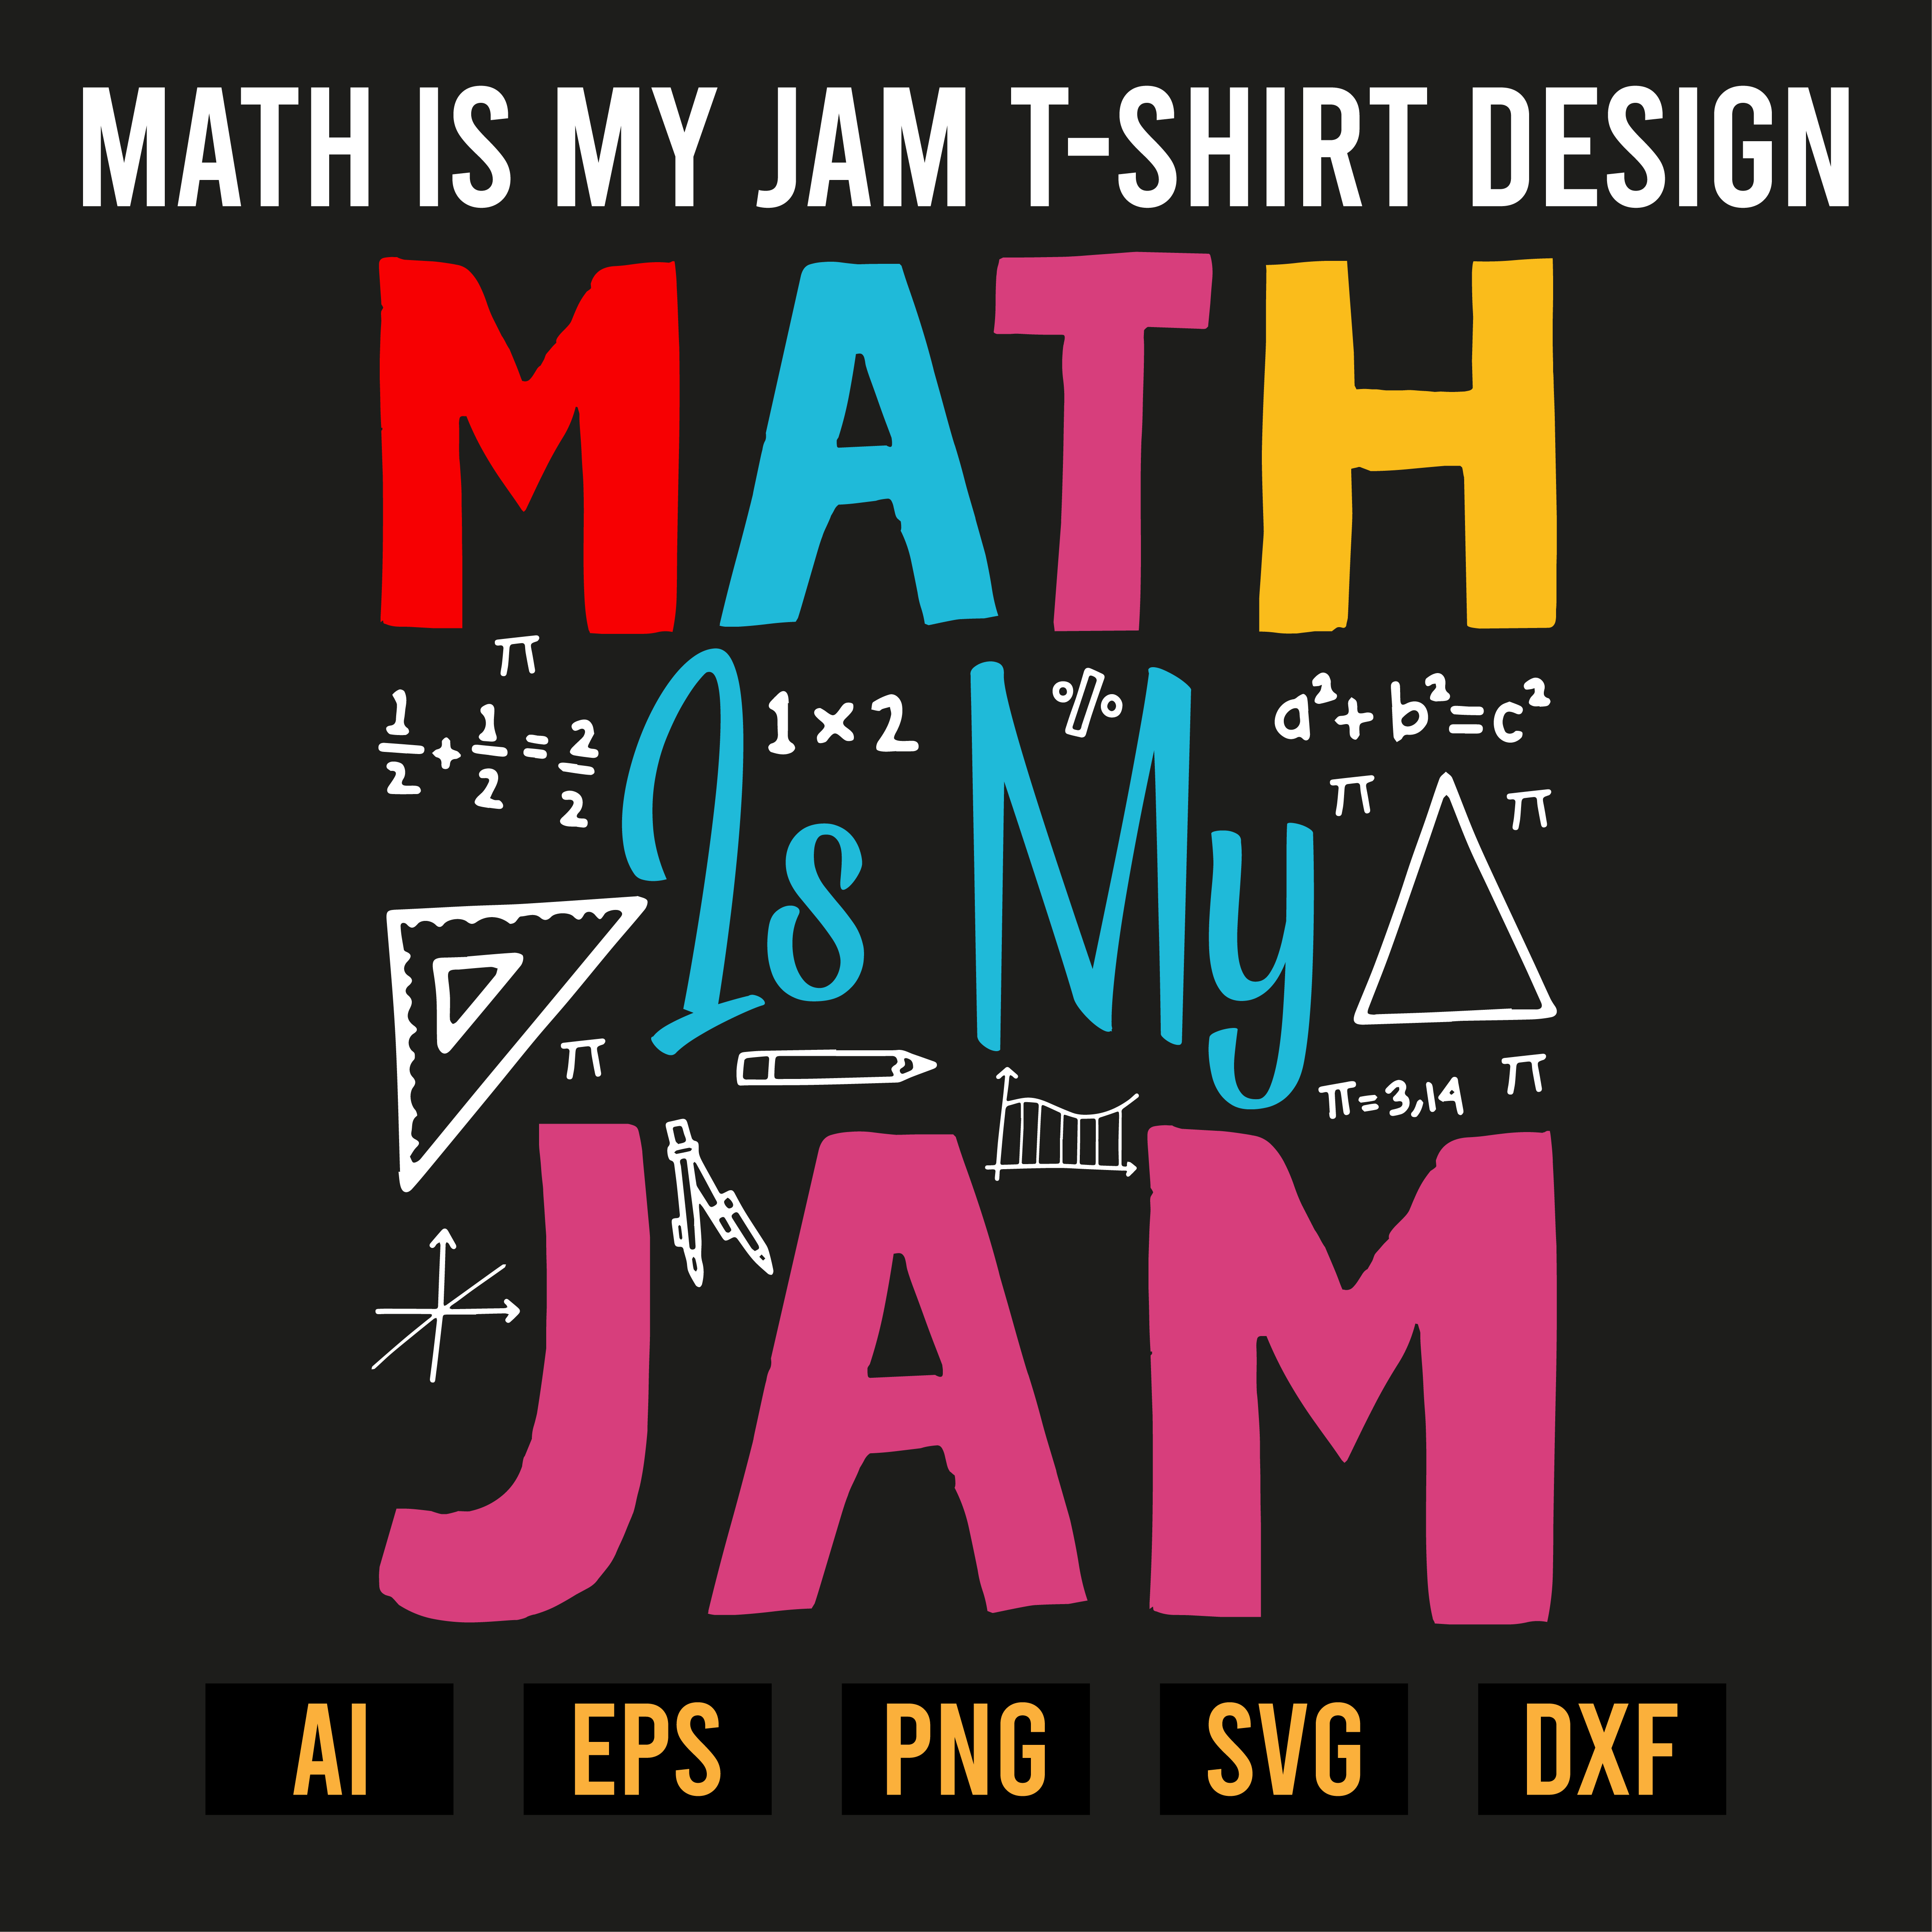 Math is My Jam T-Shirt Design cover image.